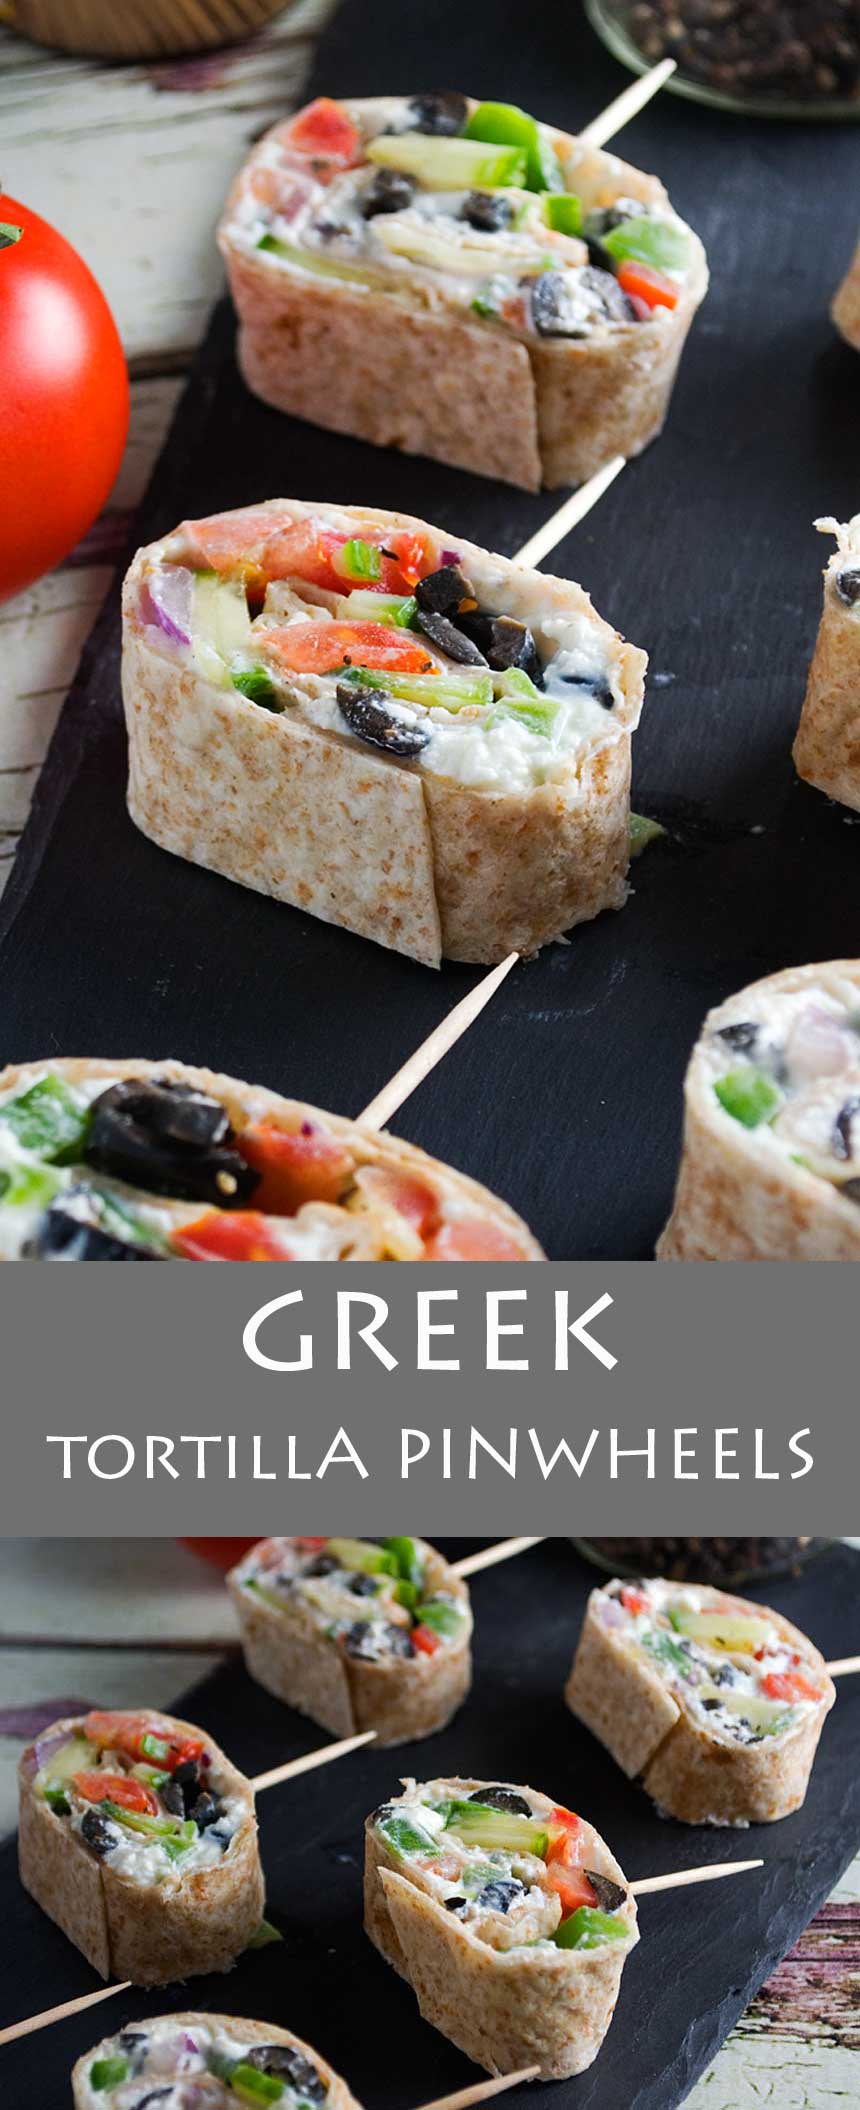 Pinterest pin showing Greek tortilla pinwheels on a black platter with a big title in the middle.